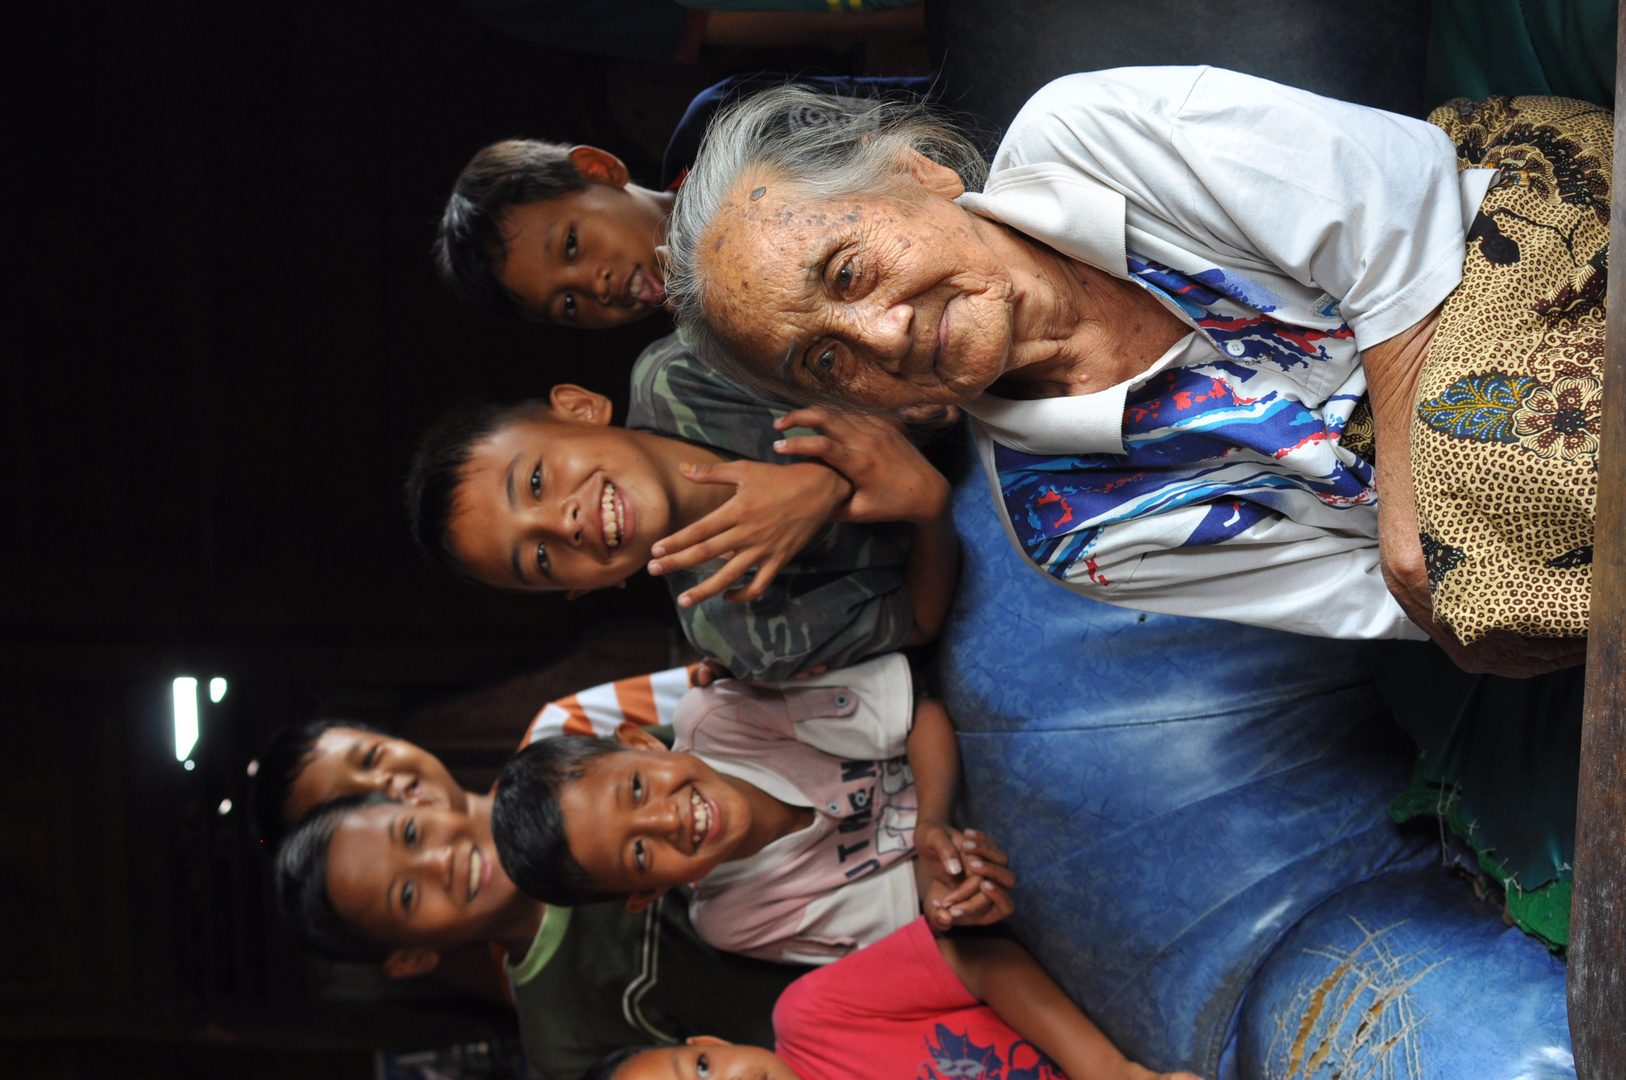 Old indonesian Lady surrounded by Kids